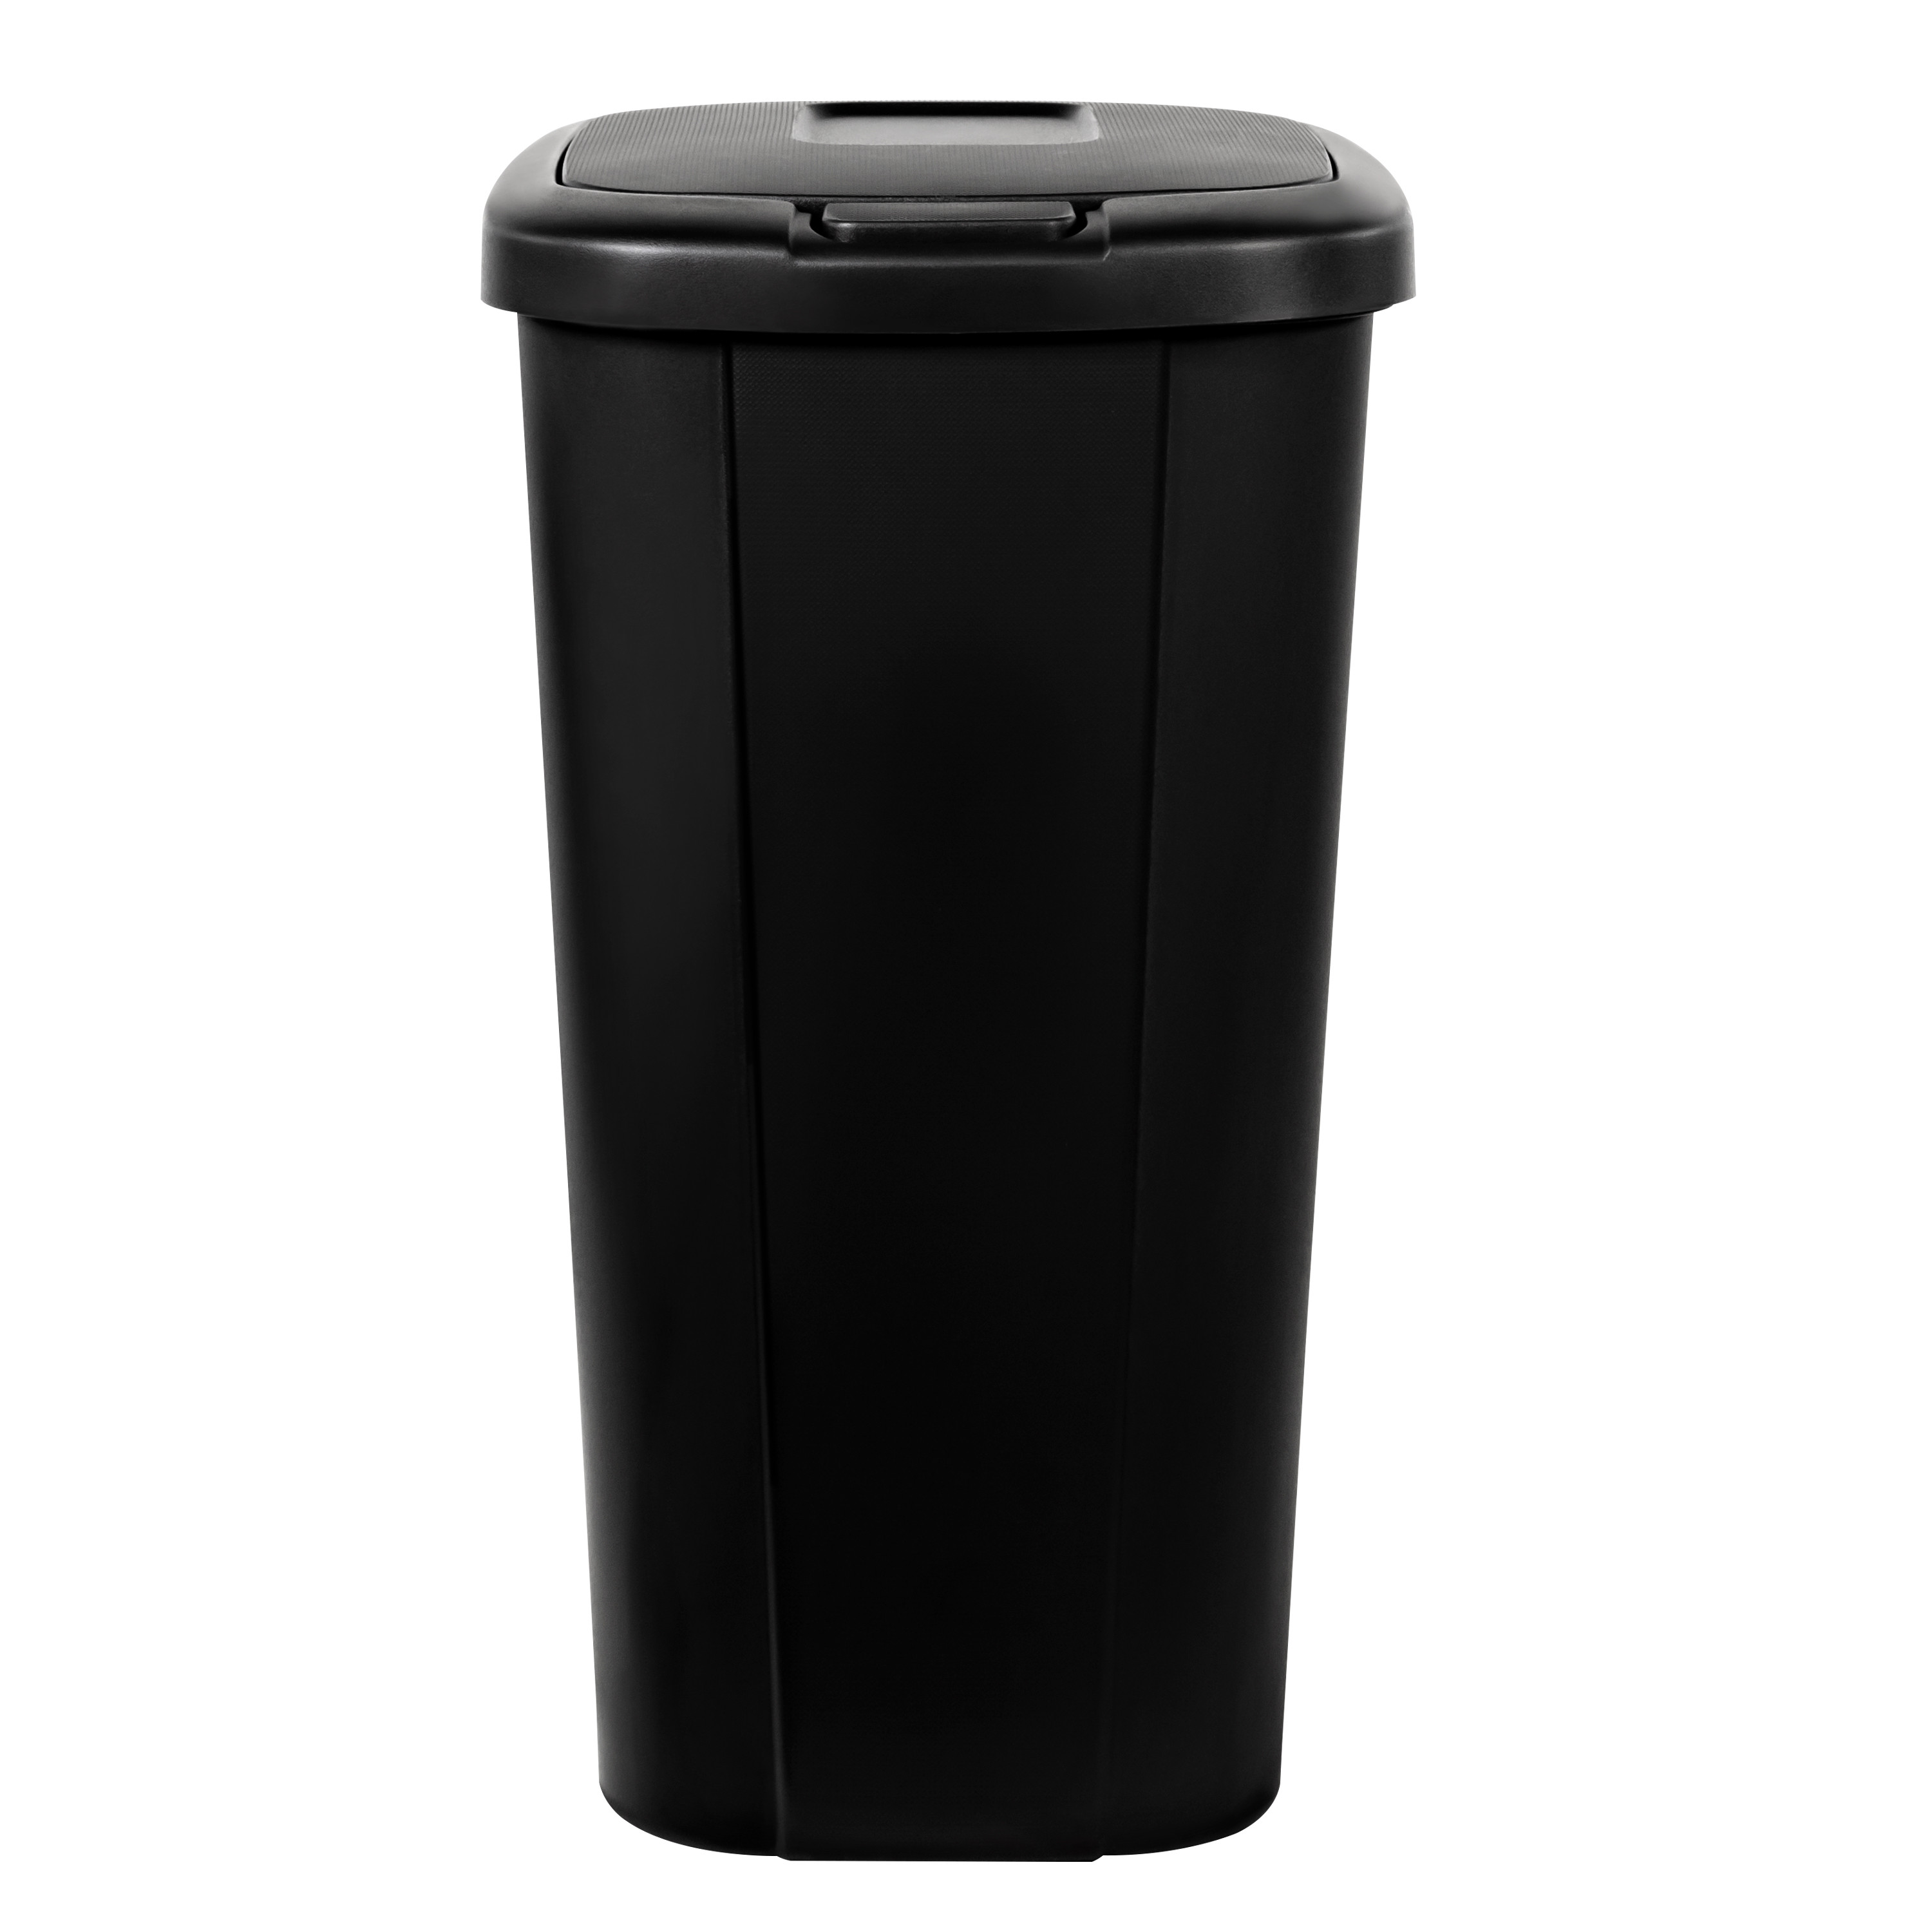 Hefty 13.3 Gallon Trash Can, Plastic Touch Top Kitchen Trash Can, Black - image 5 of 8